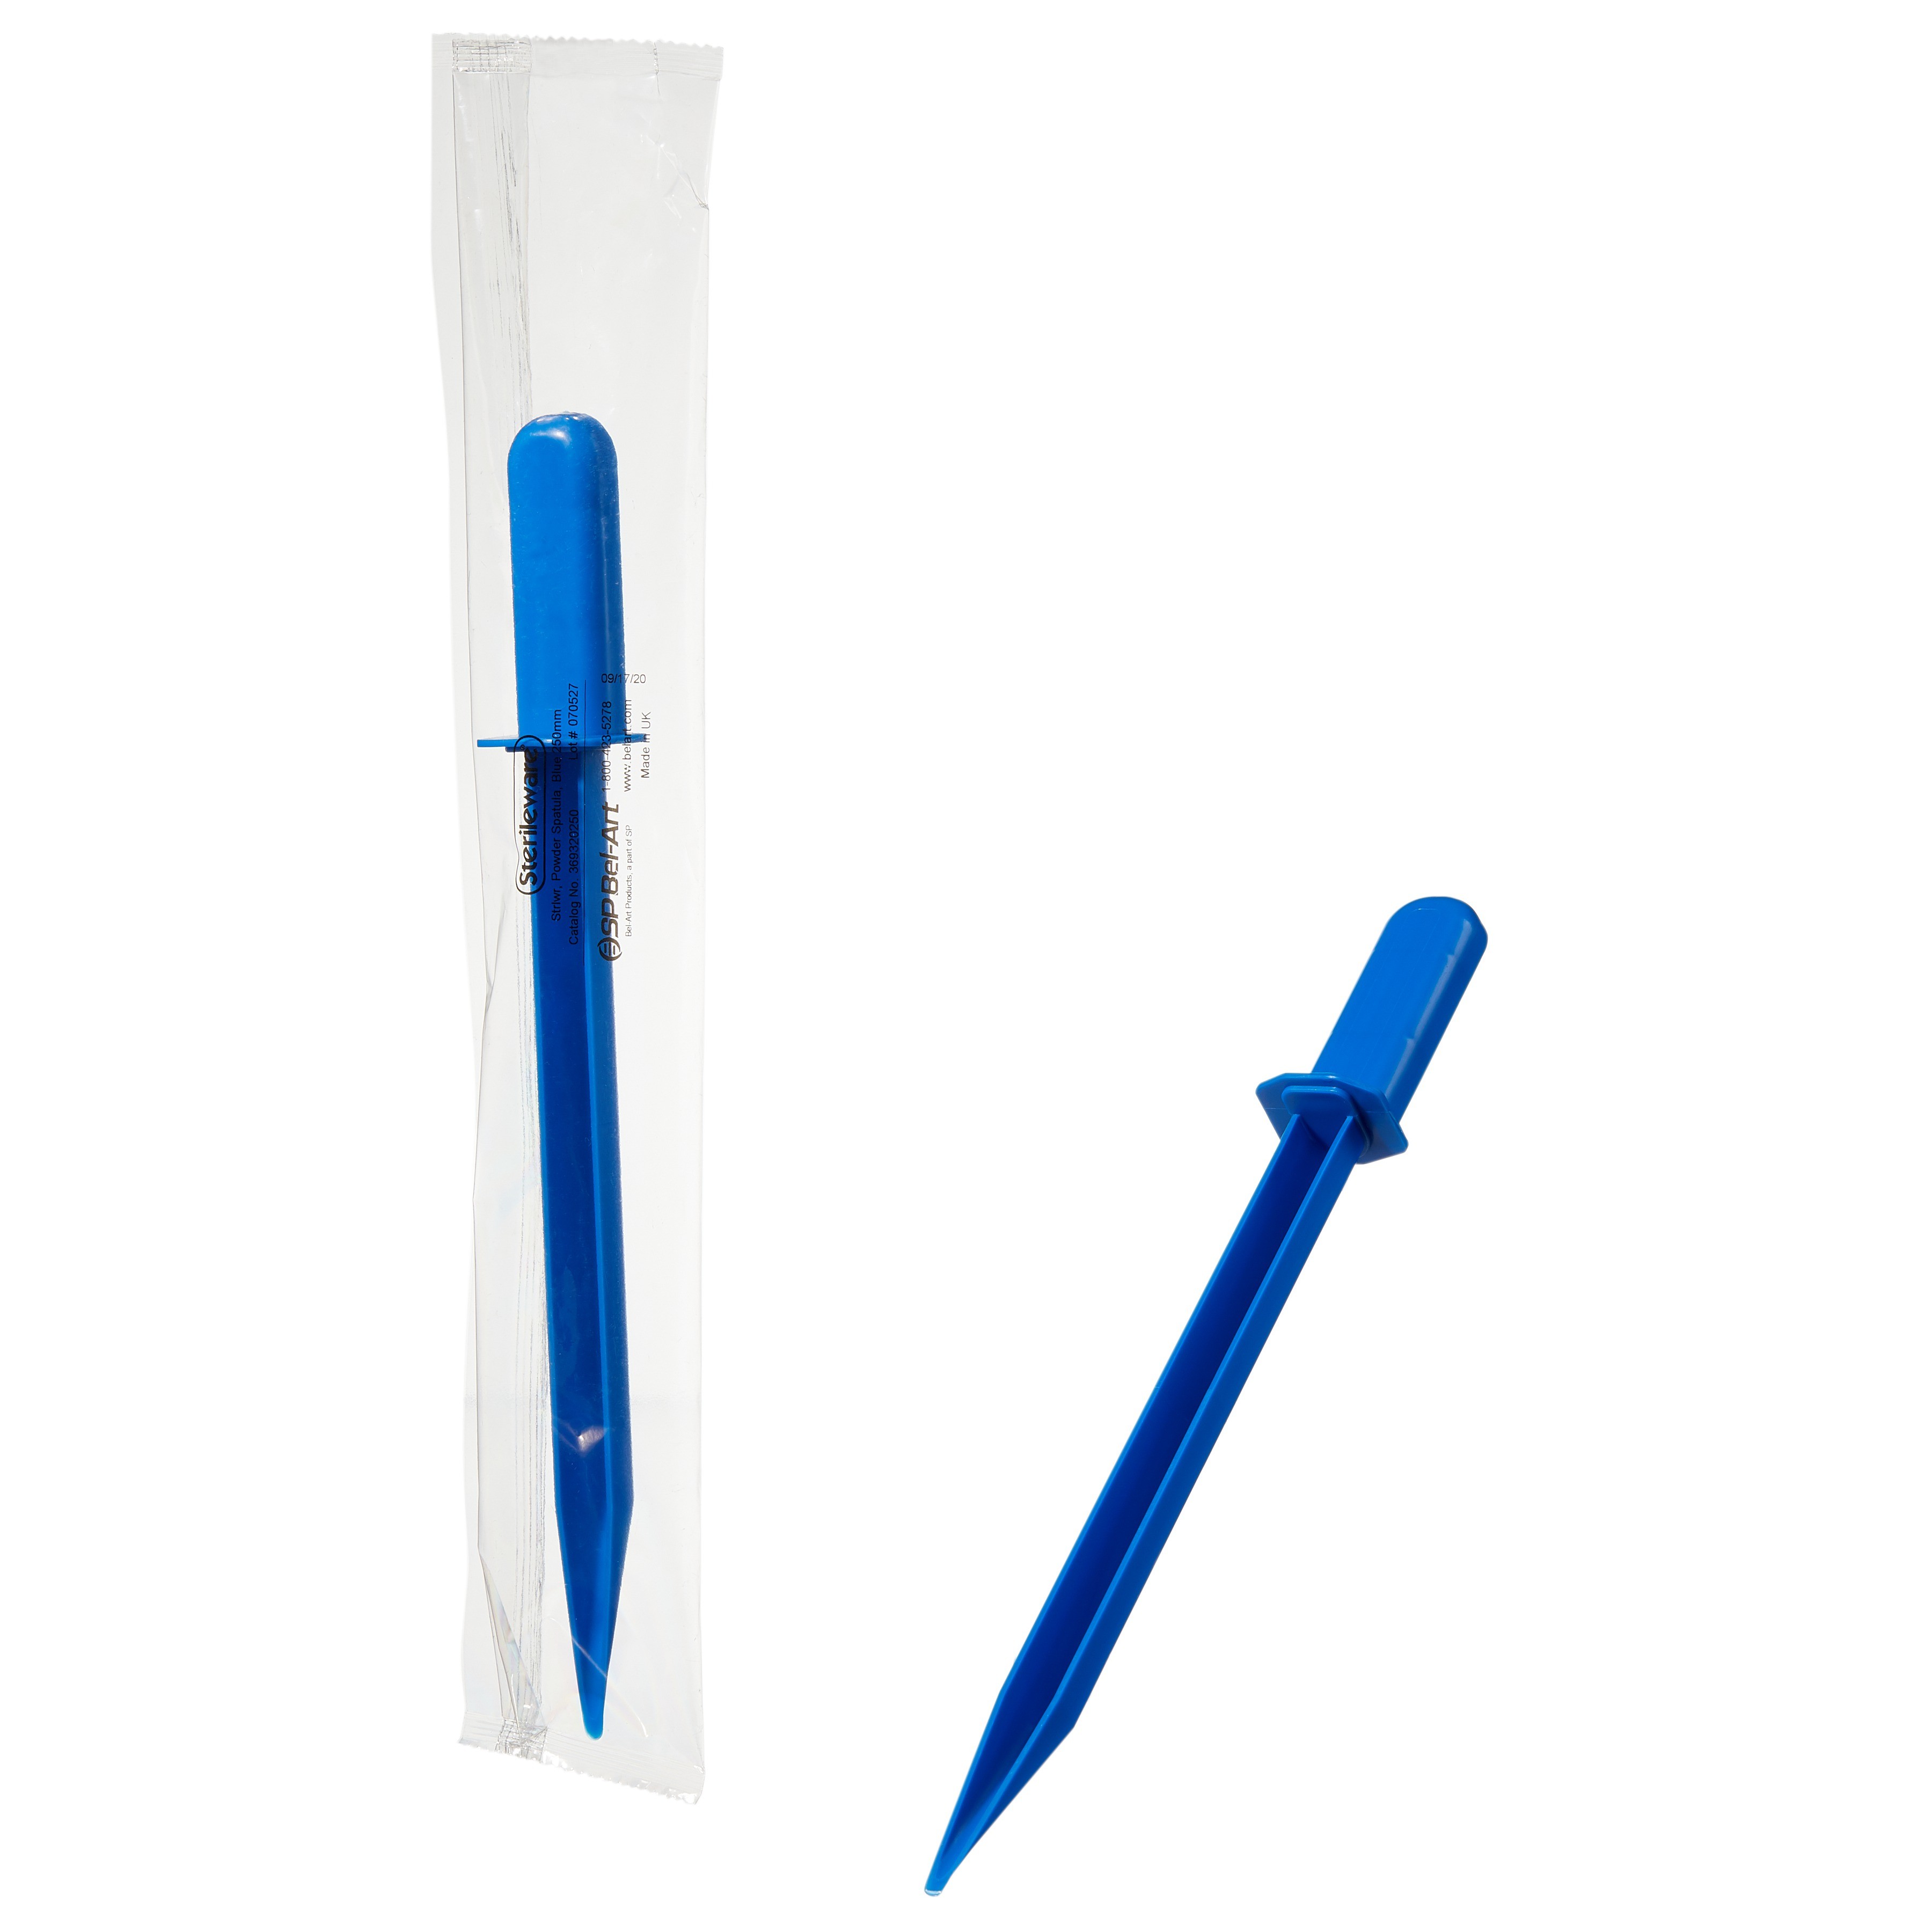 Sterileware Cupped Powder Spatulas; 25cm, Blue, Individually Wrapped (Pack of 100)